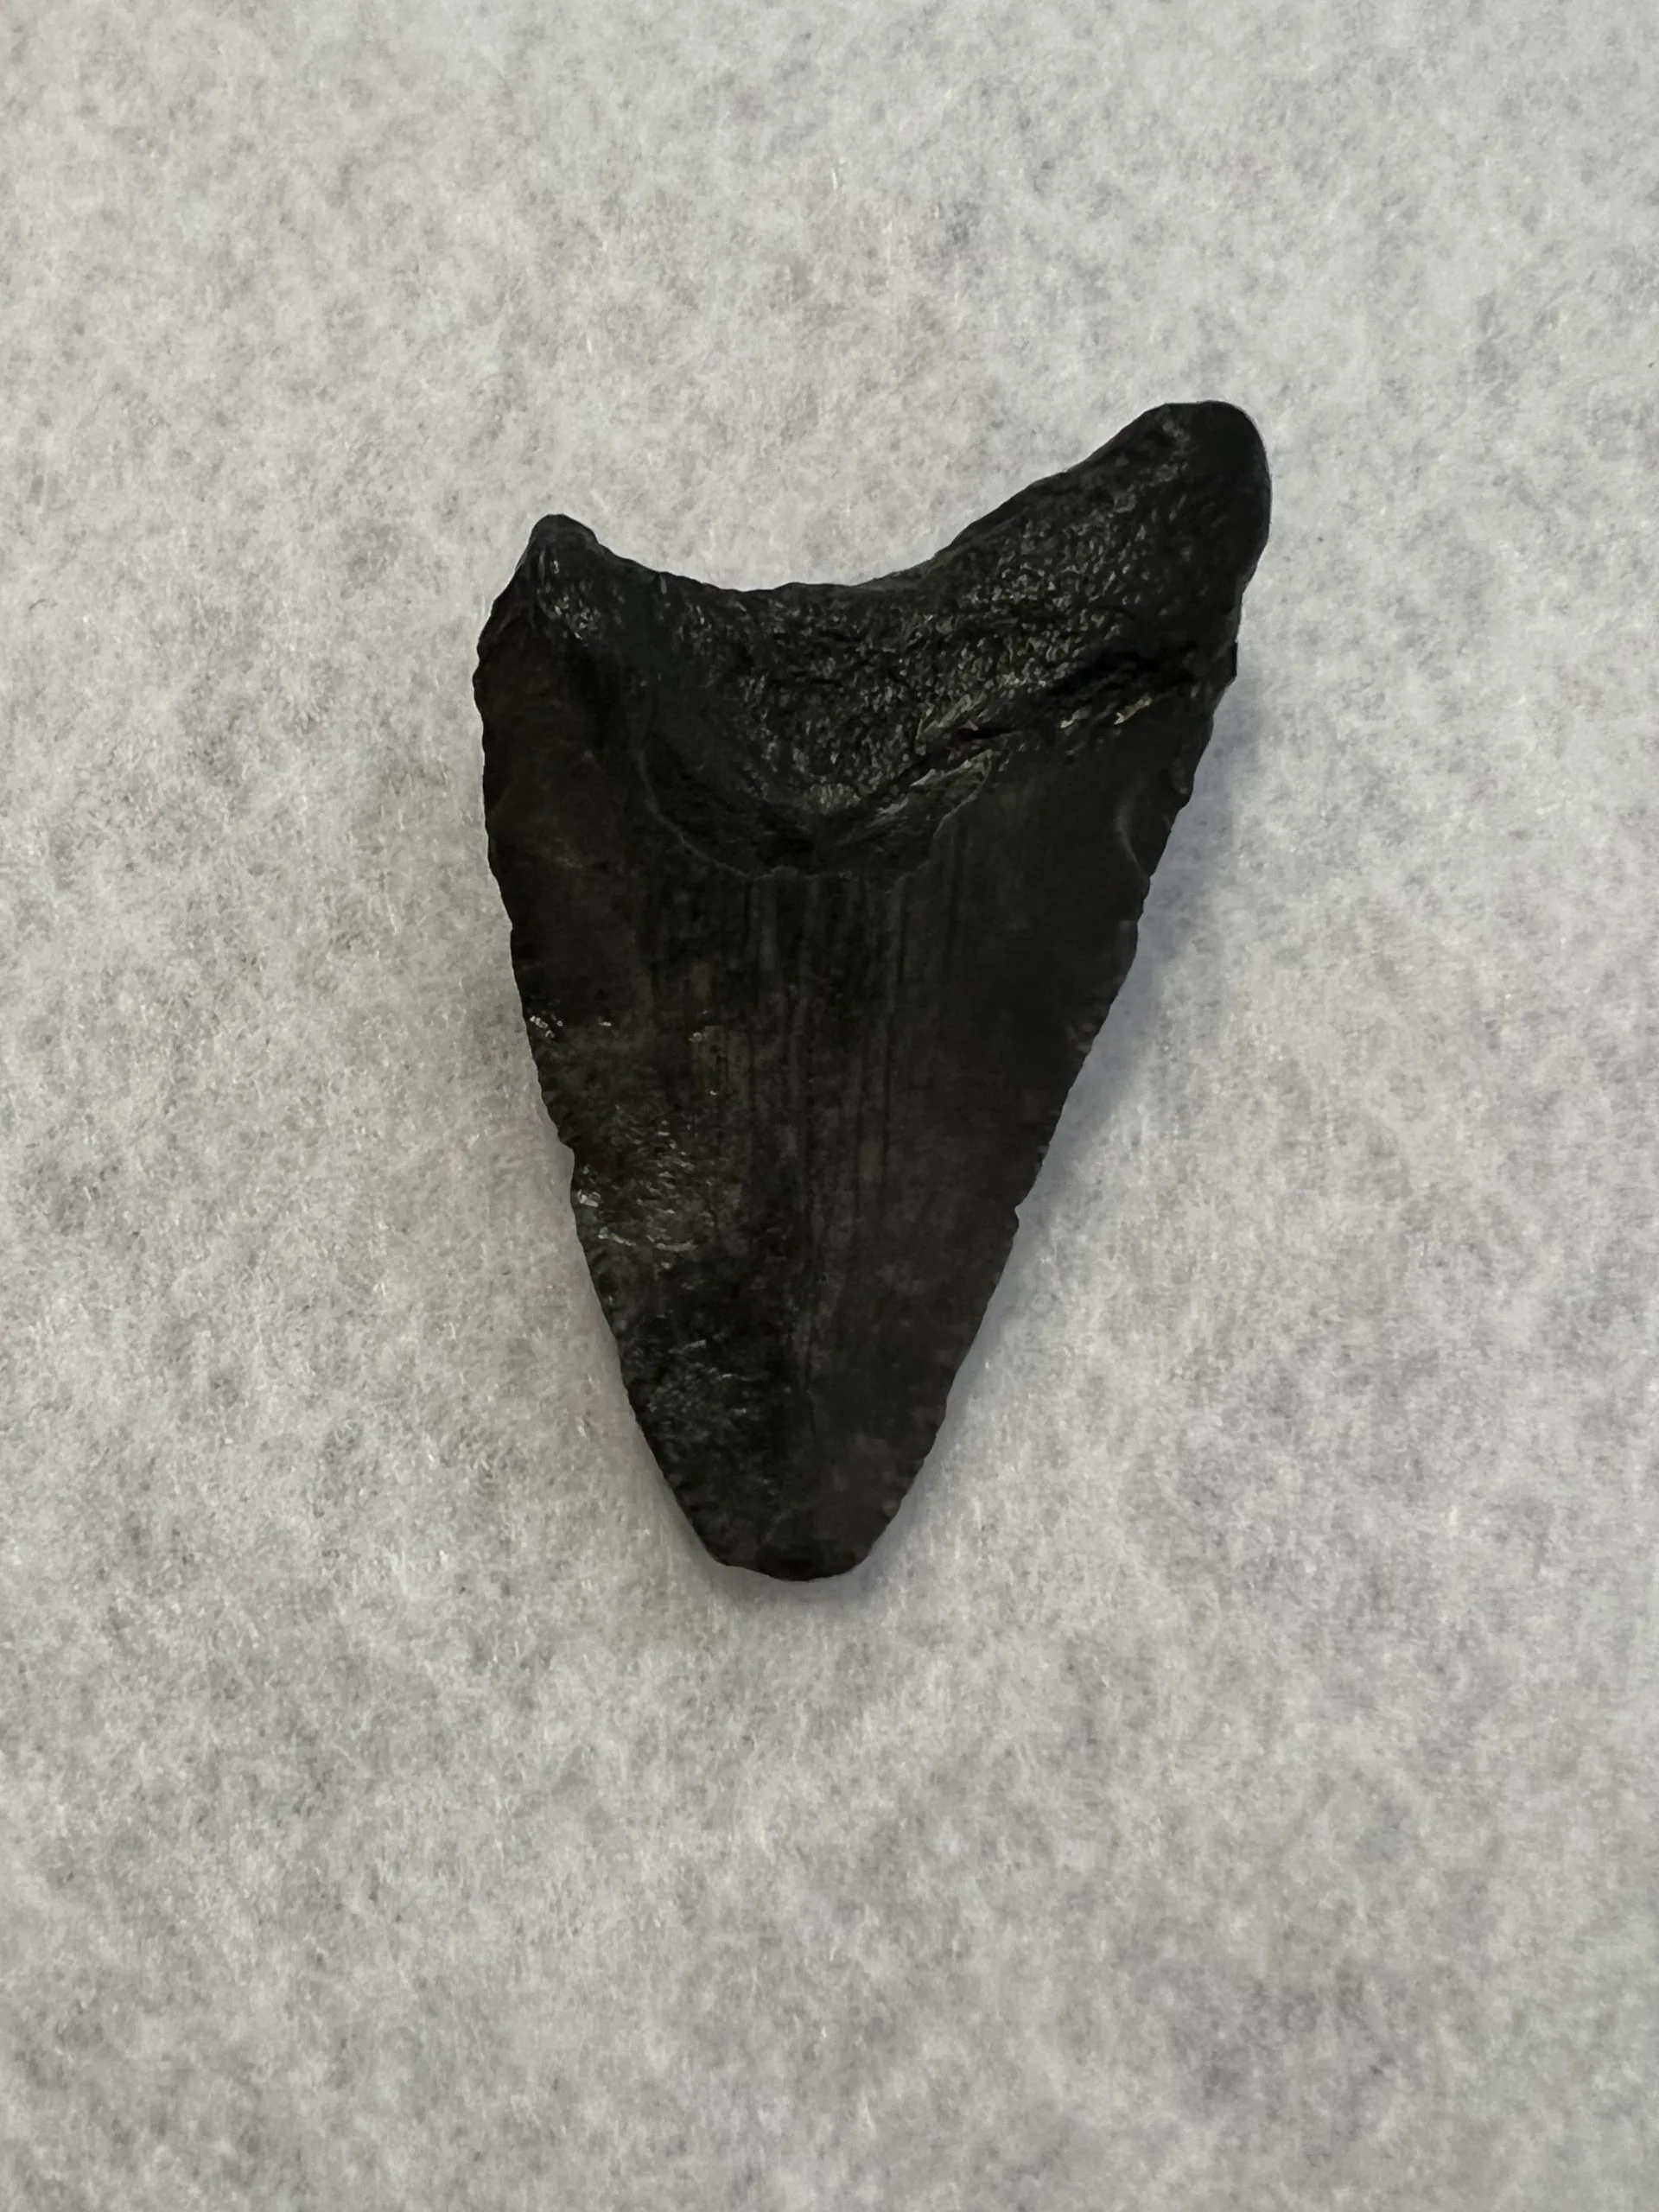 Megalodon Tooth, South Carolina, 2.26 inch Prehistoric Online